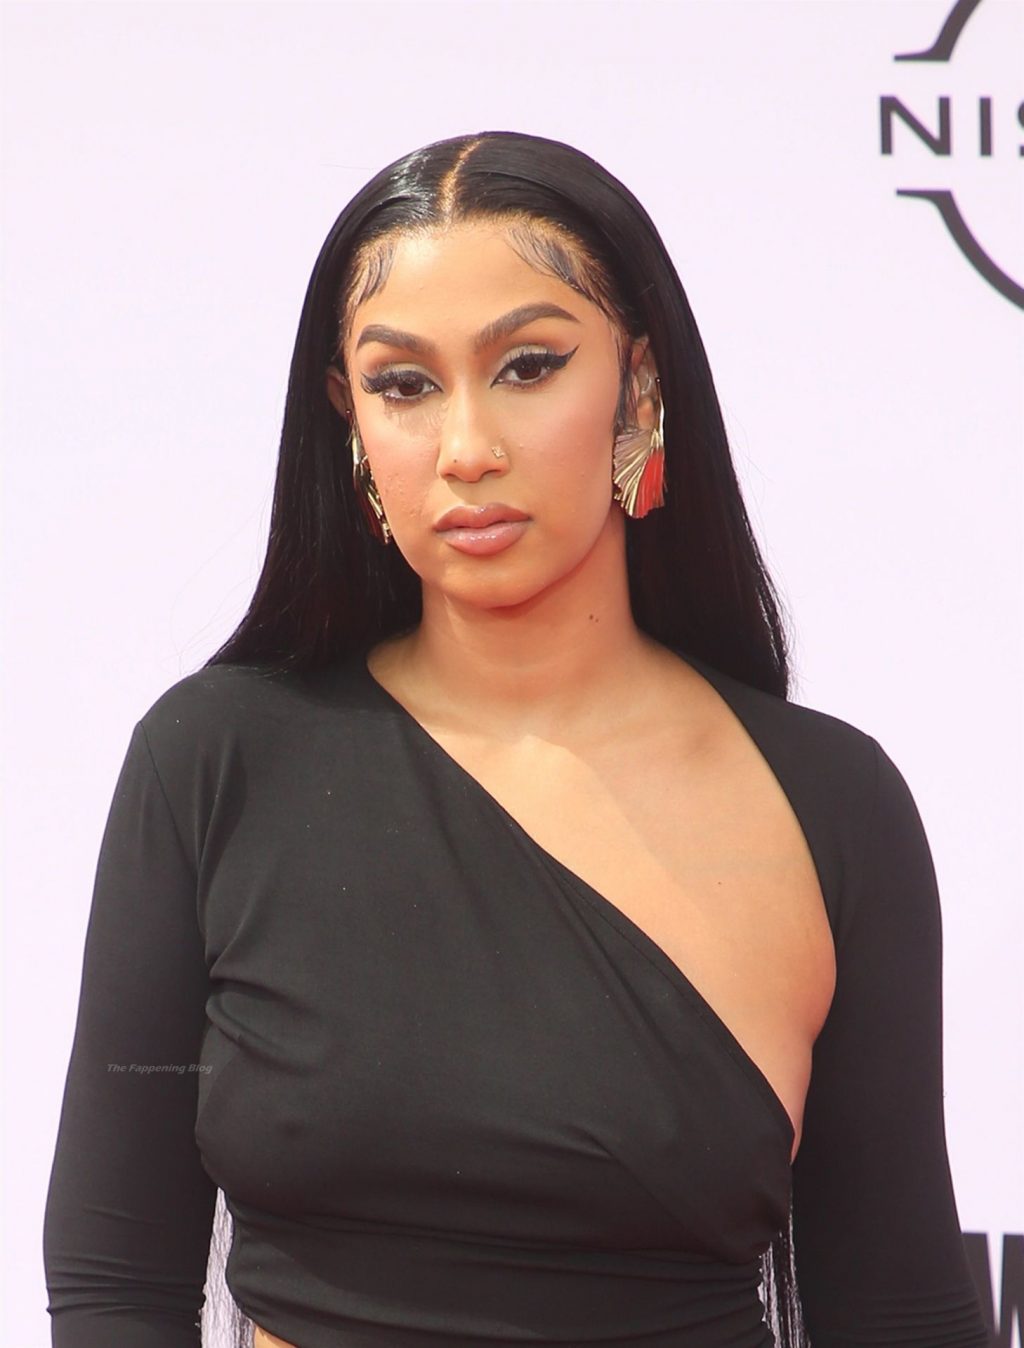 Queen Naija is Seen at The BET Awards 2021 and Megan Thee Stallion’s BET Afterparty (15 Photos)